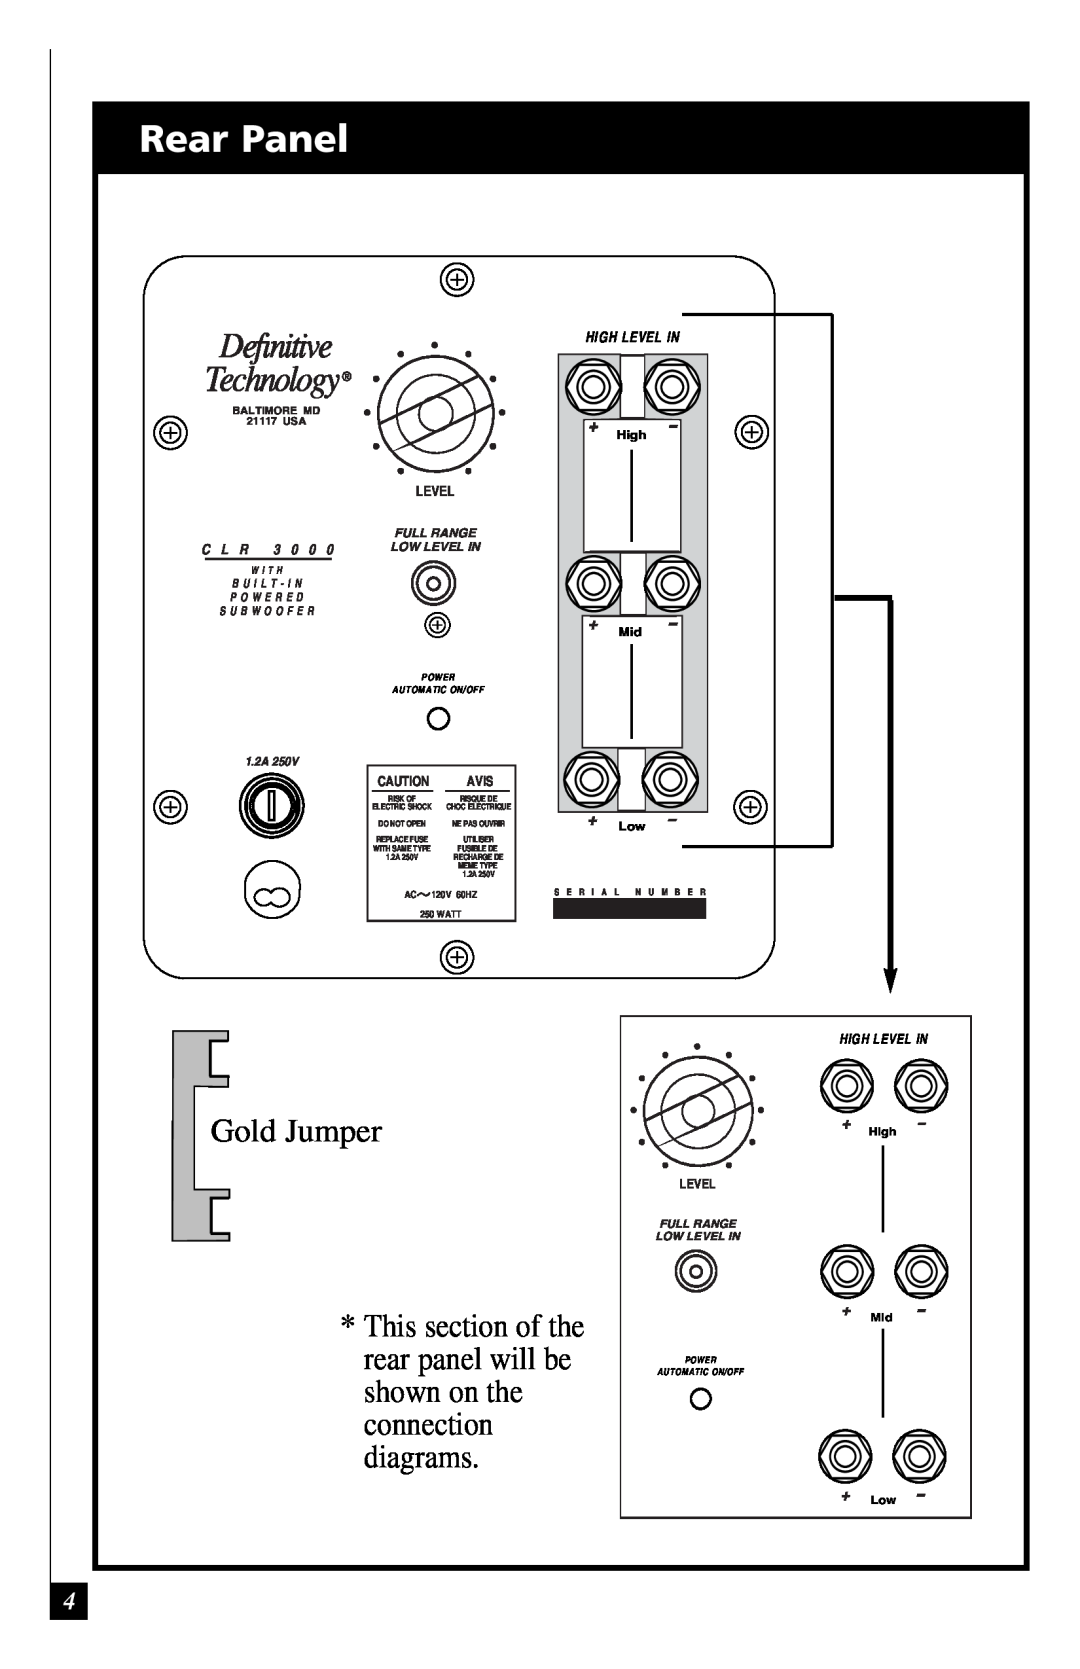 Definitive Technology 3000 Gold Jumper, rear panel will be, shown on the, connection, diagrams, High Level In, Full Range 